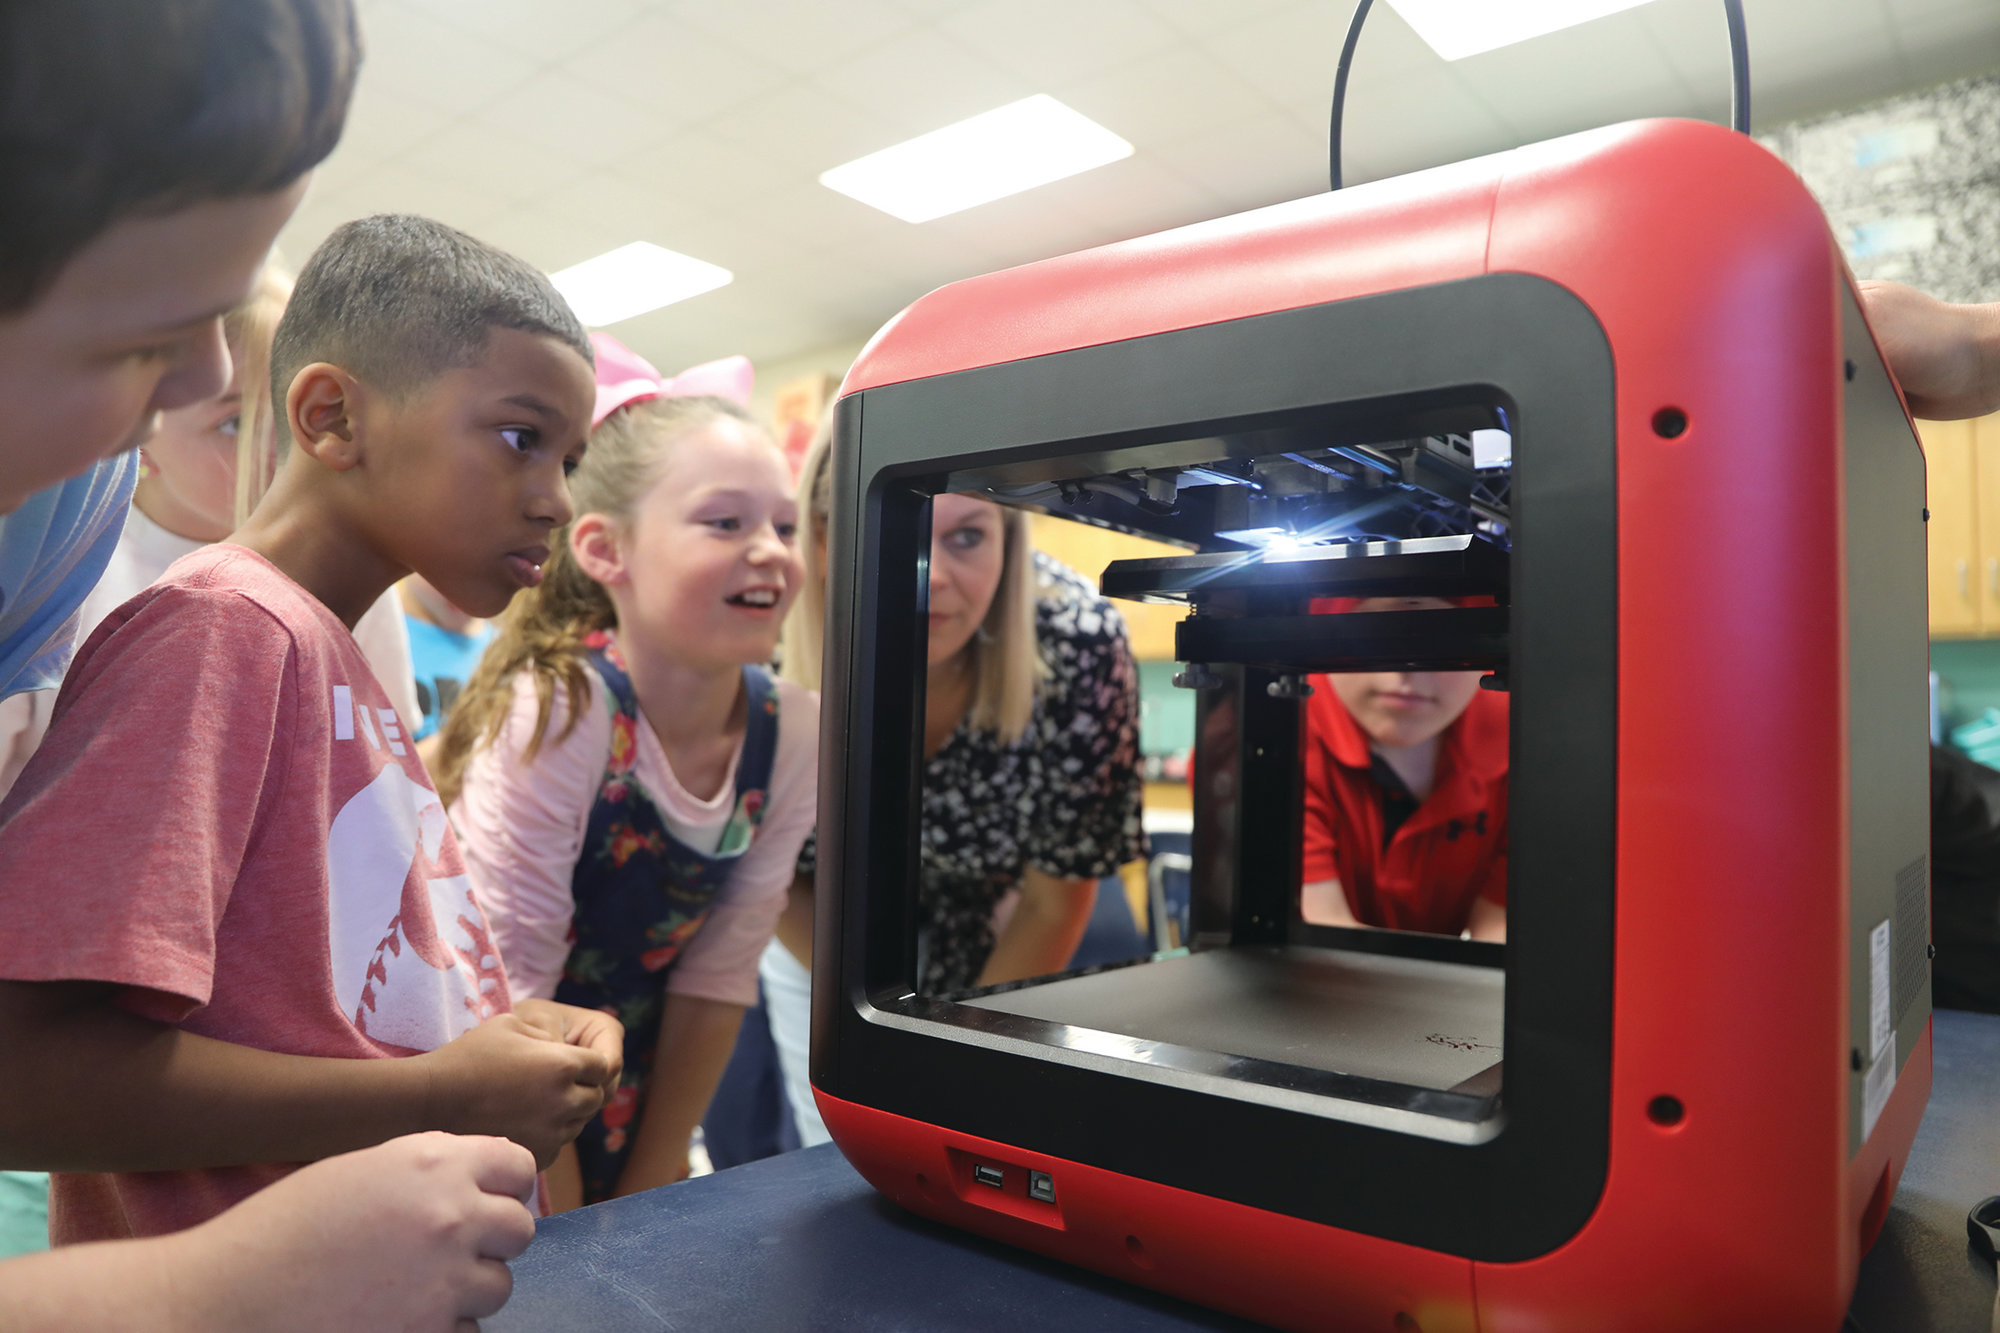 Alice Drive Elementary School teacher Lisa Jackson's fourth-grade class visited Kristi Waldron's STEM classroom lab to see how the new 3-D printer from Central Carolina Technical College works.